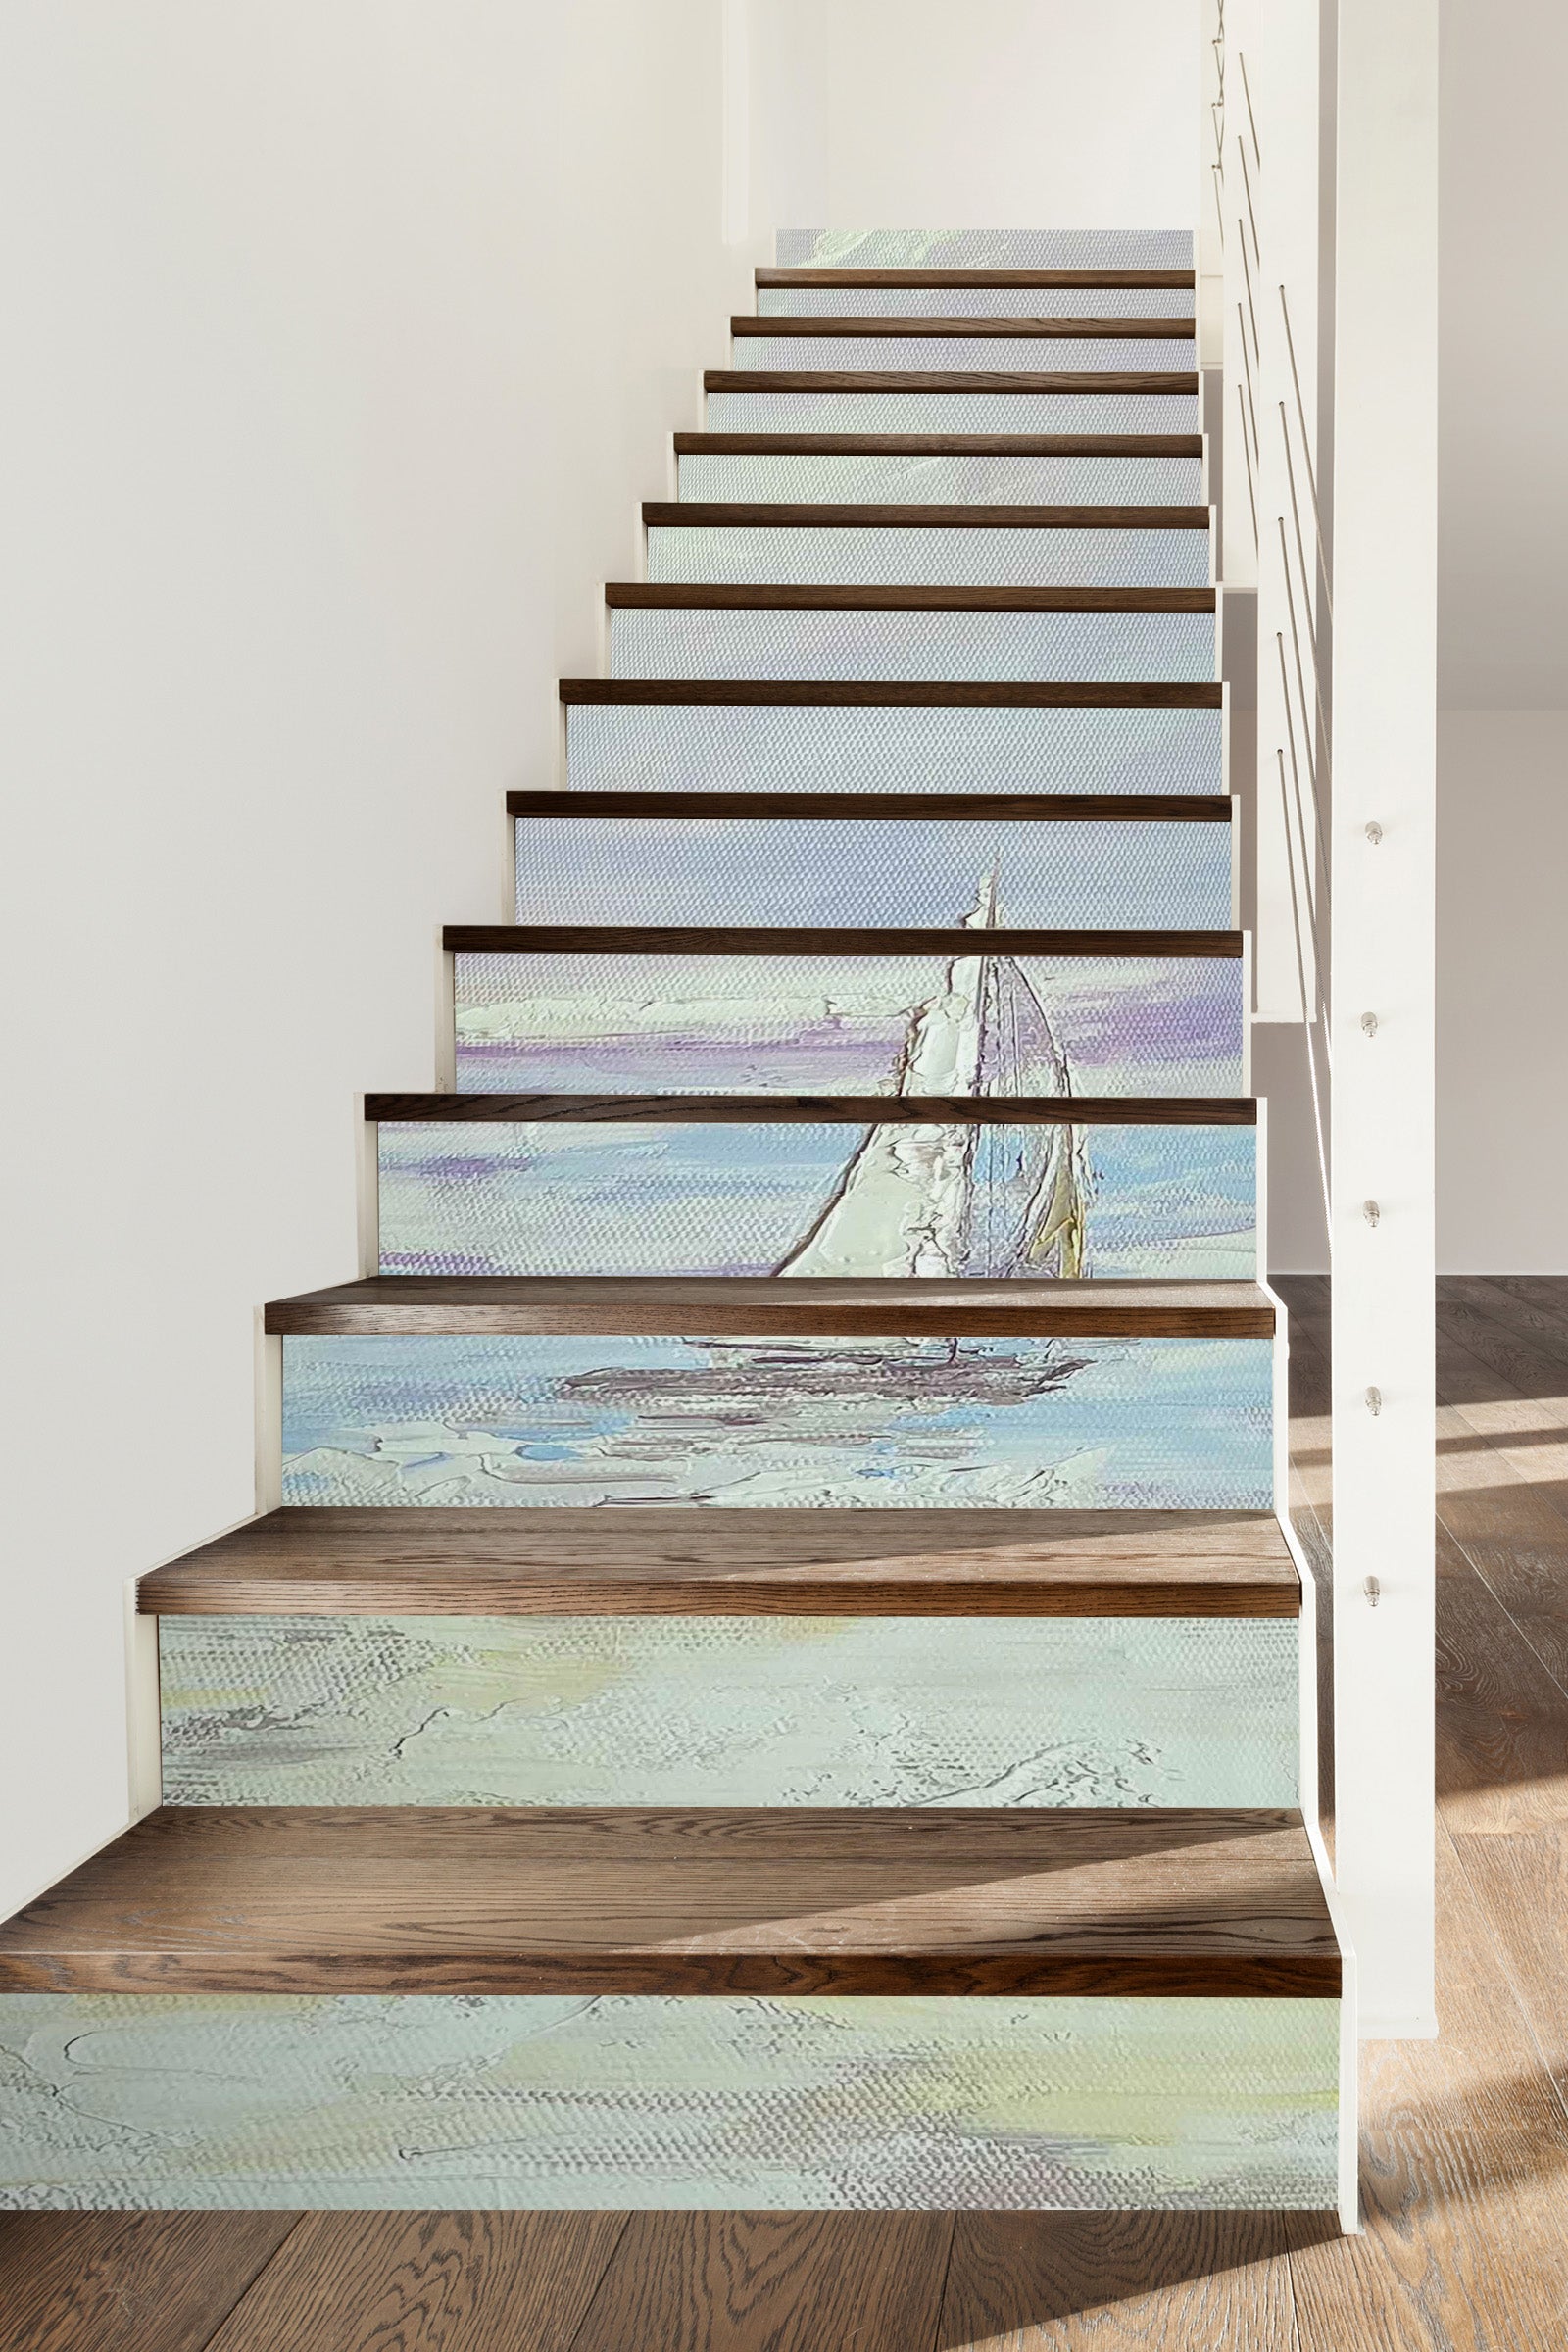 3D Hand Painted Boat 3917 Skromova Marina Stair Risers